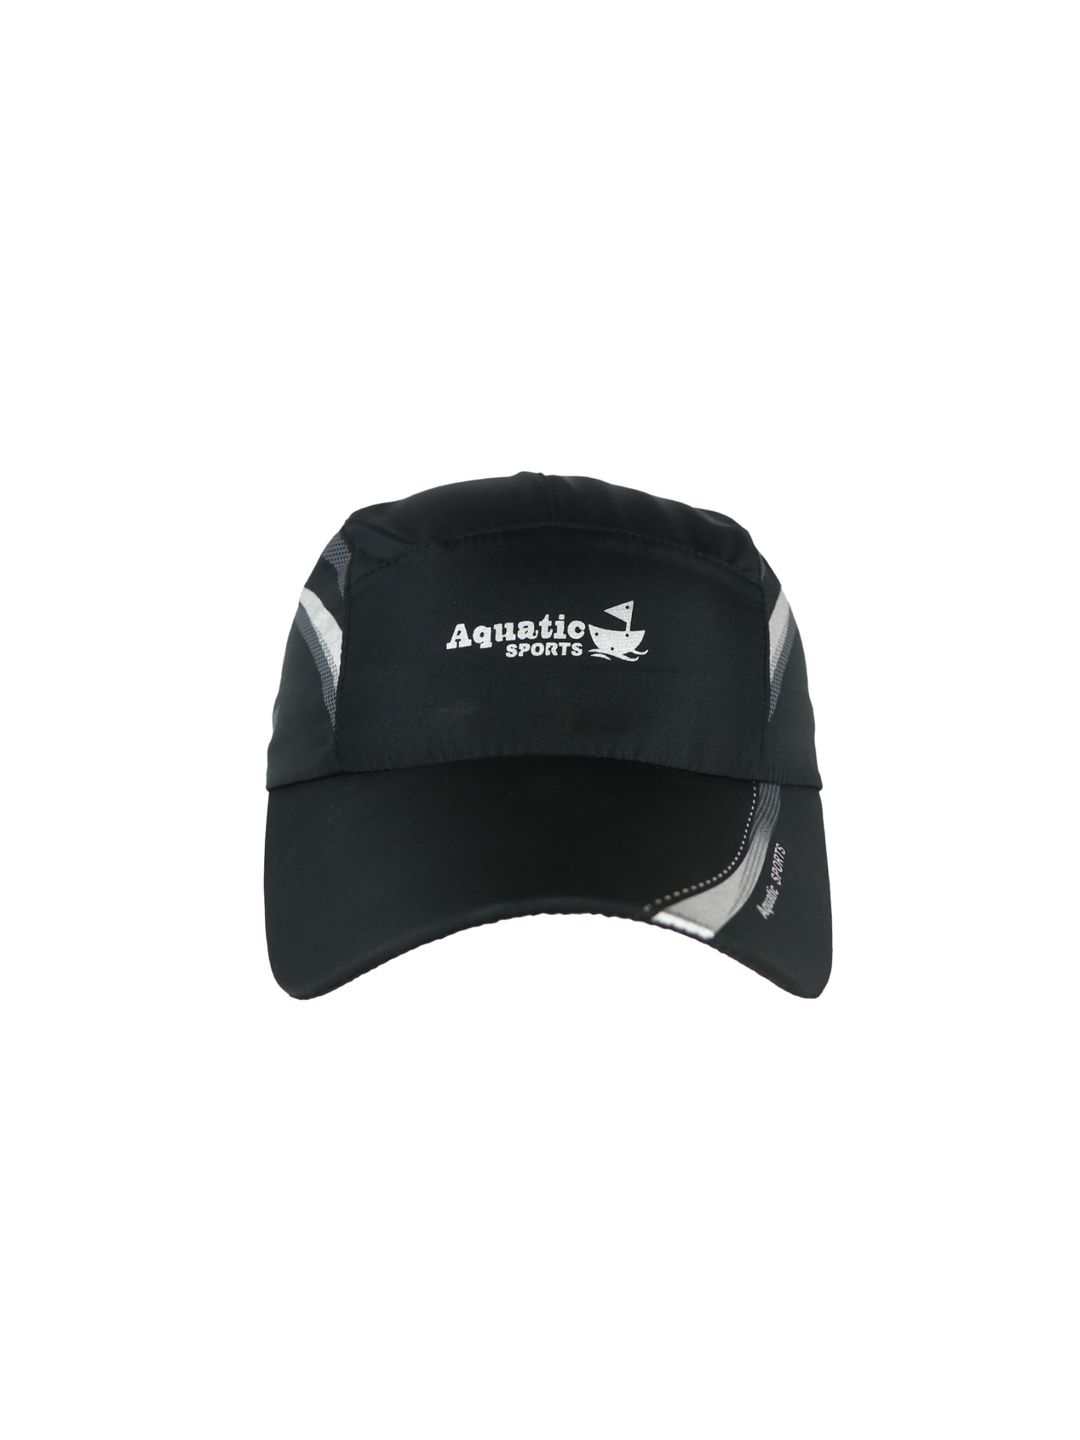 iSWEVEN Unisex Black & White Printed Snapback Cap Price in India